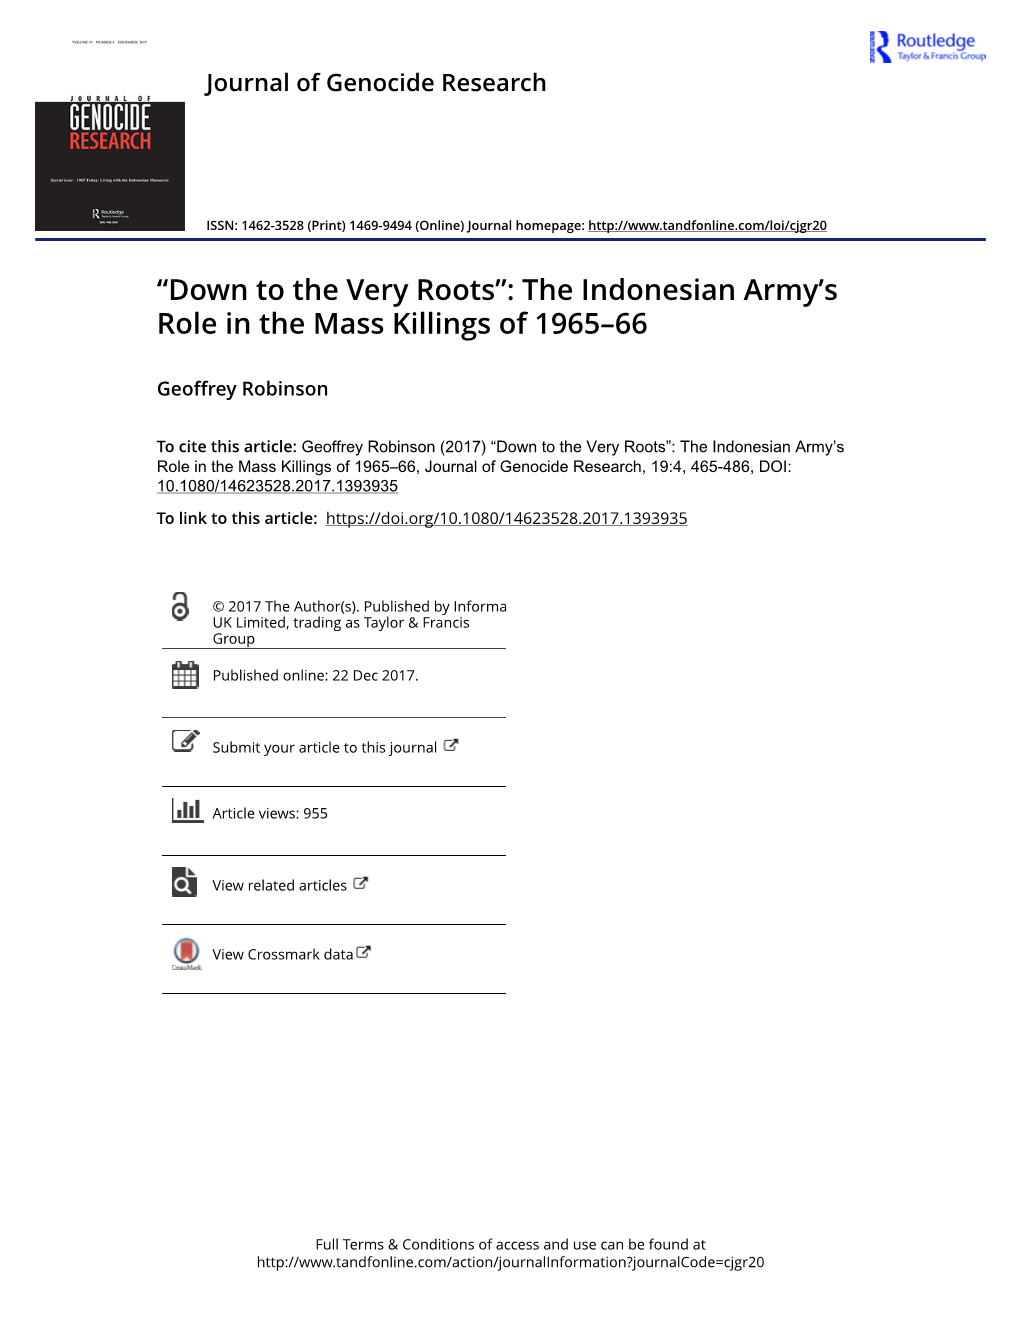 “Down to the Very Roots”: the Indonesian Army's Role in the Mass Killings of 1965–66